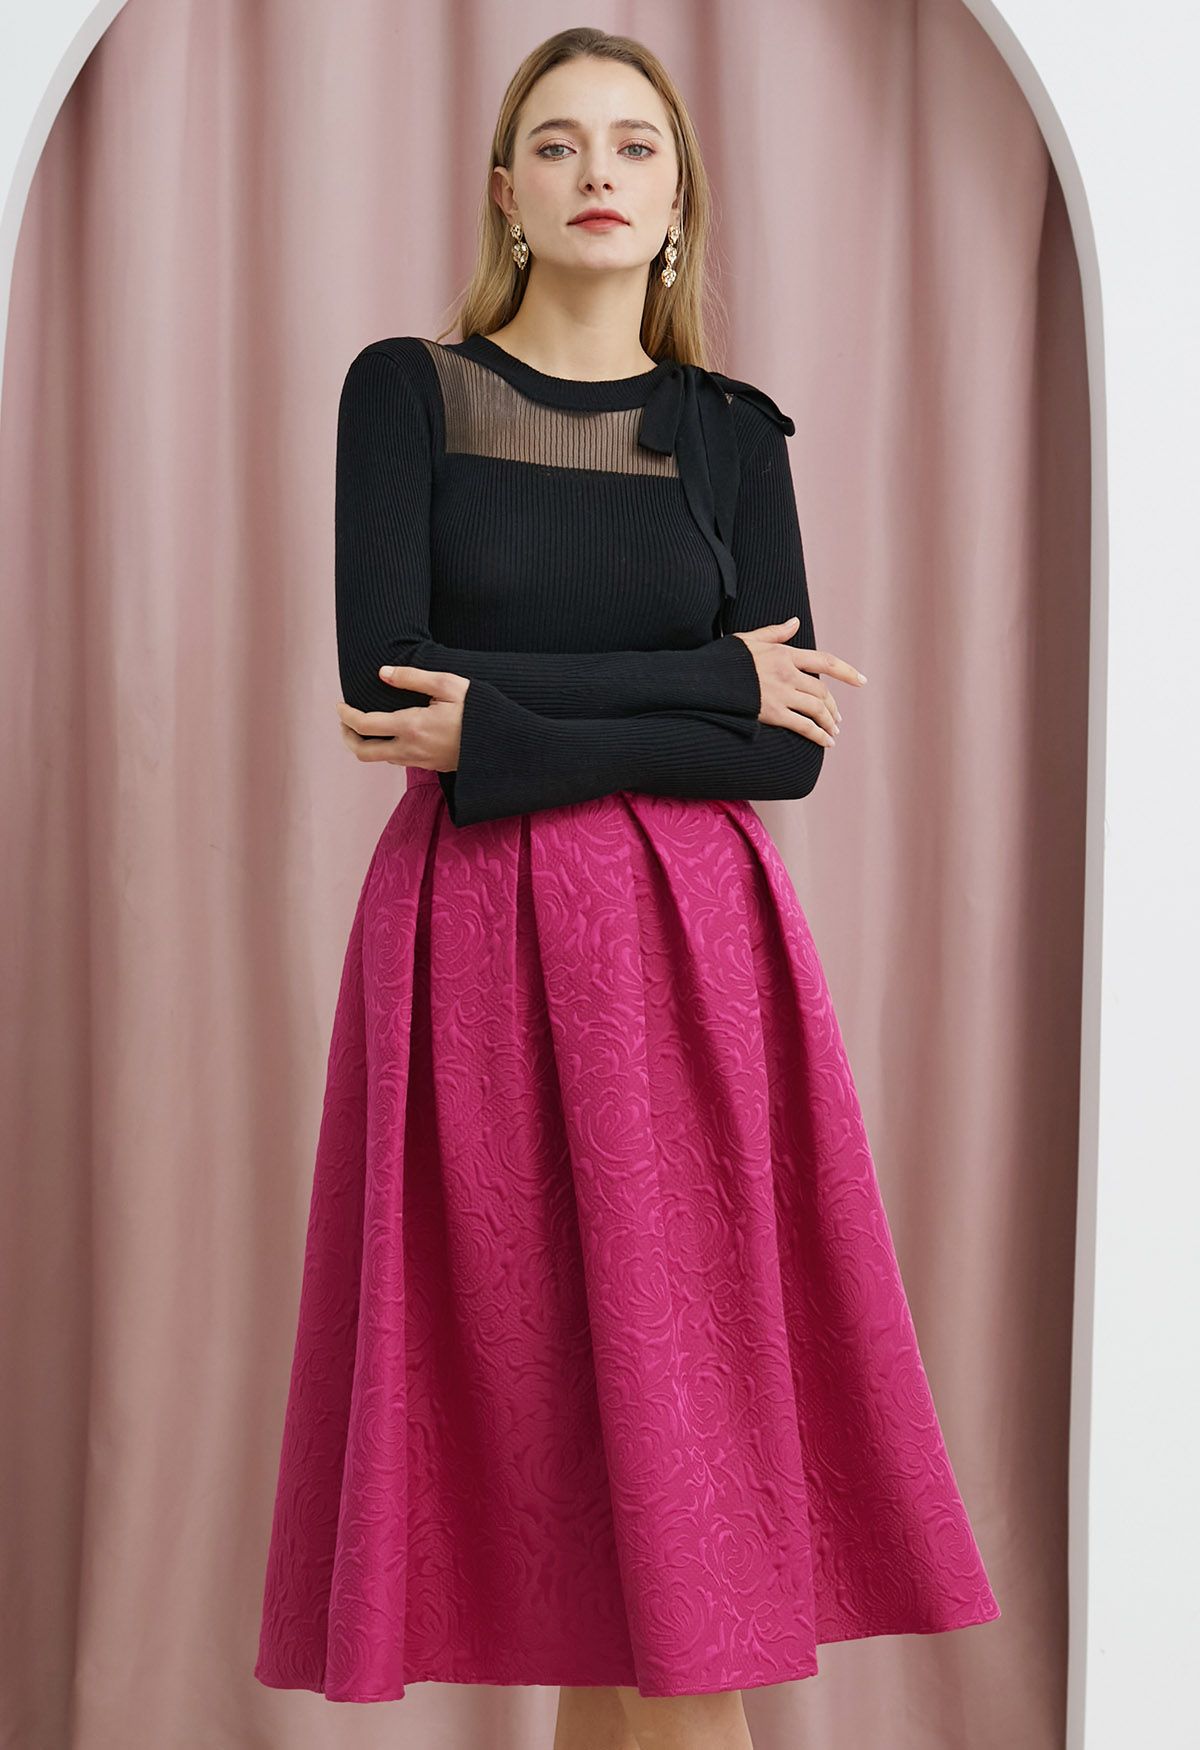 Embossed Floral Pleated Flare Midi Skirt in Hot Pink